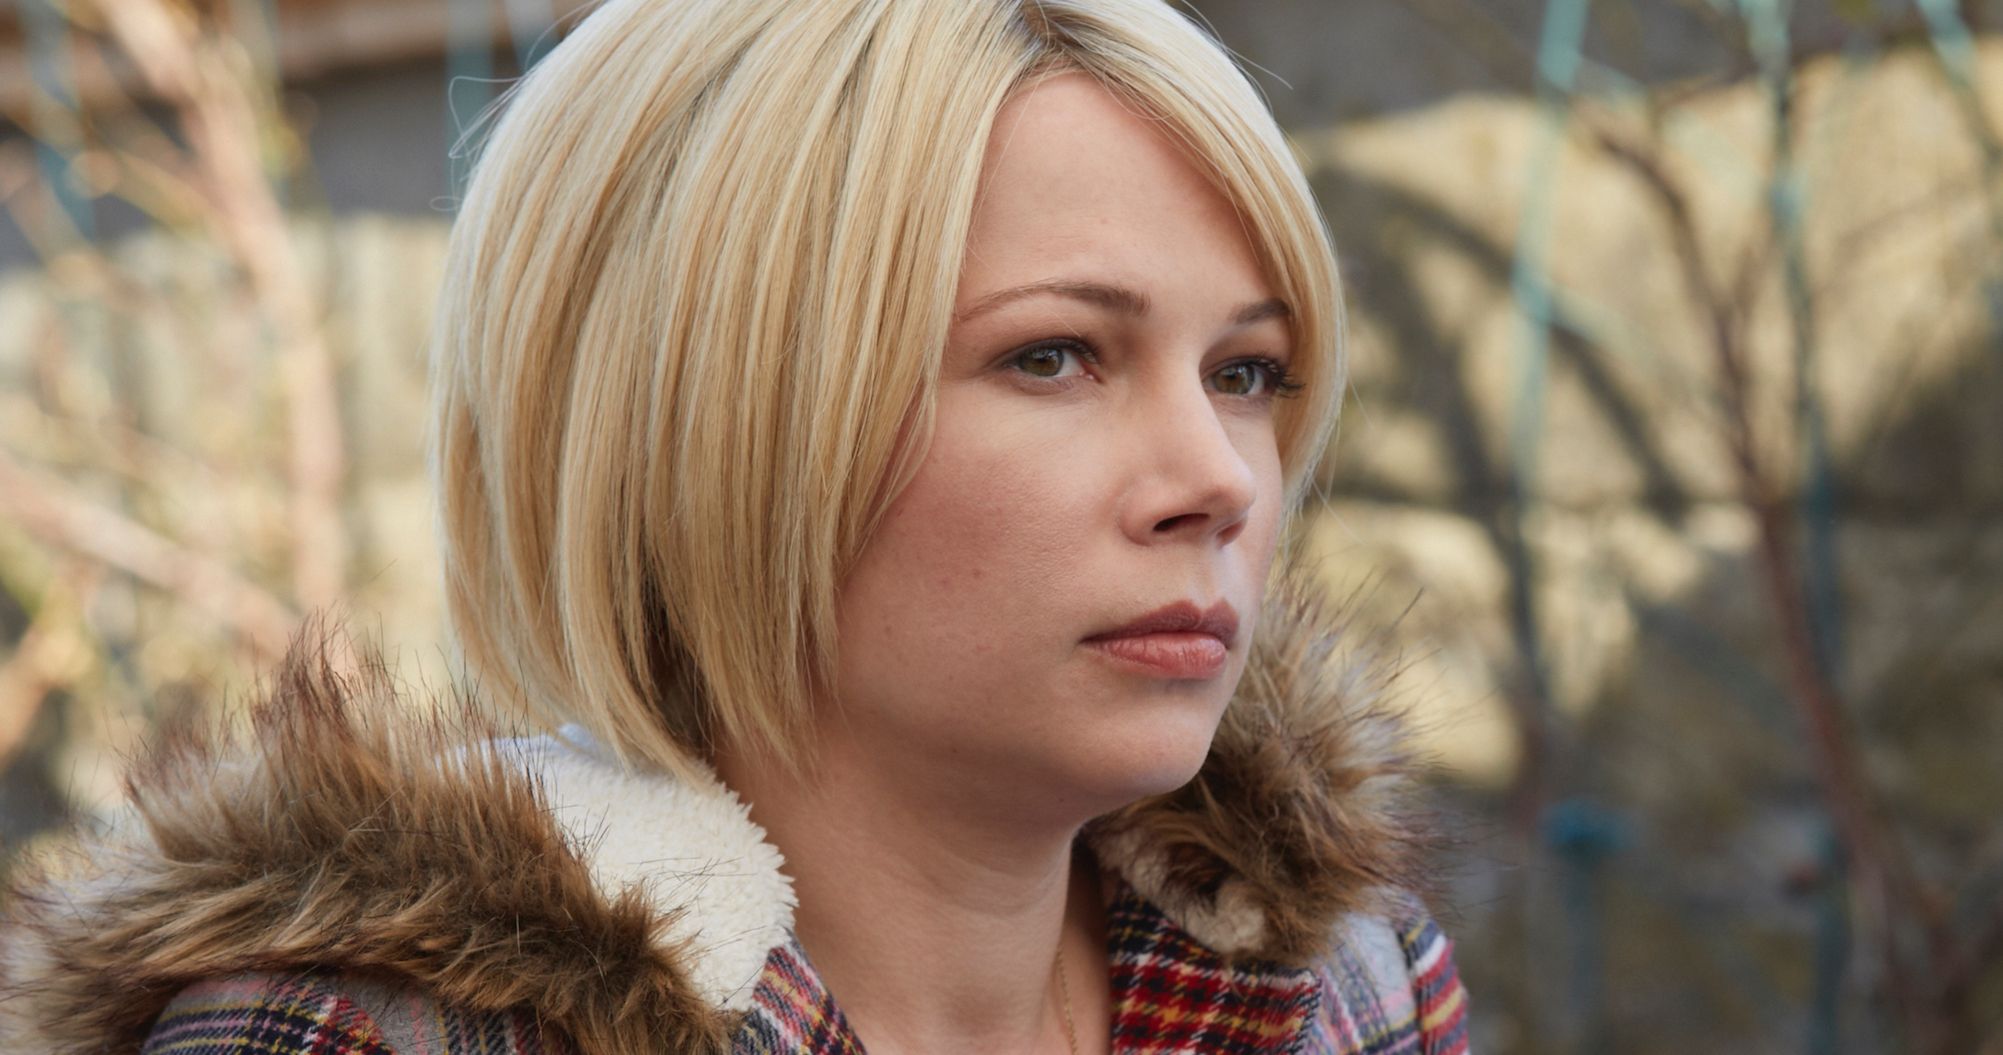 Michelle Williams to Star in Steven Spielberg Directed Movie About His Childhood